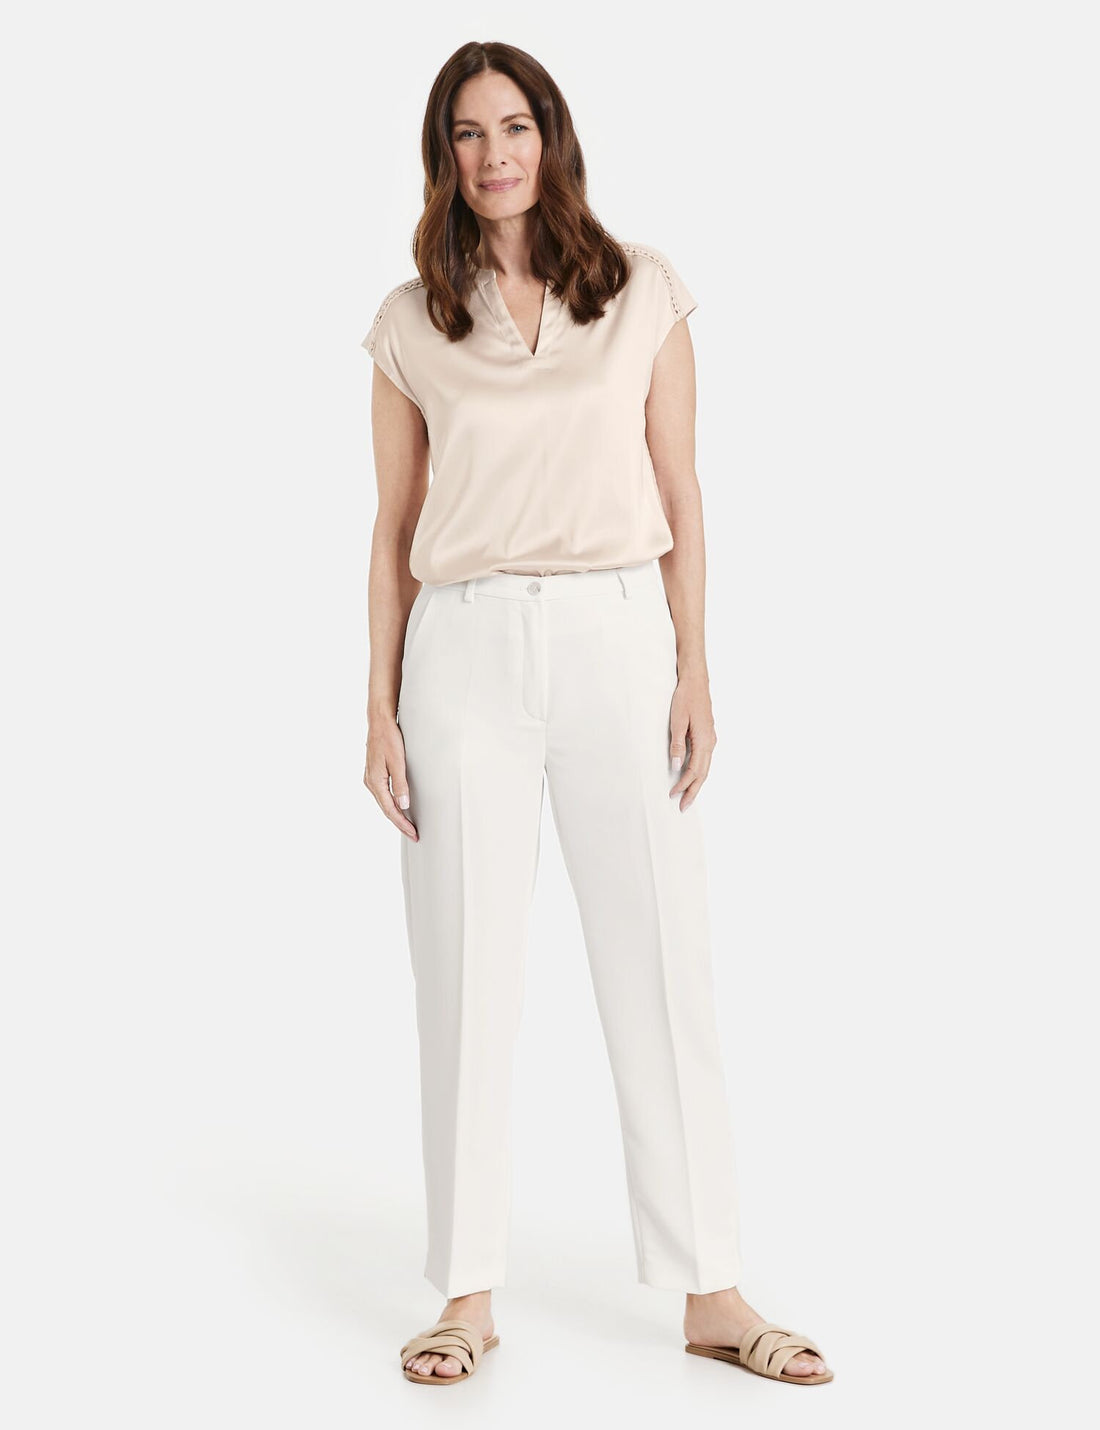 Elegant Trousers With Pressed Pleats_320026-31278_99700_01